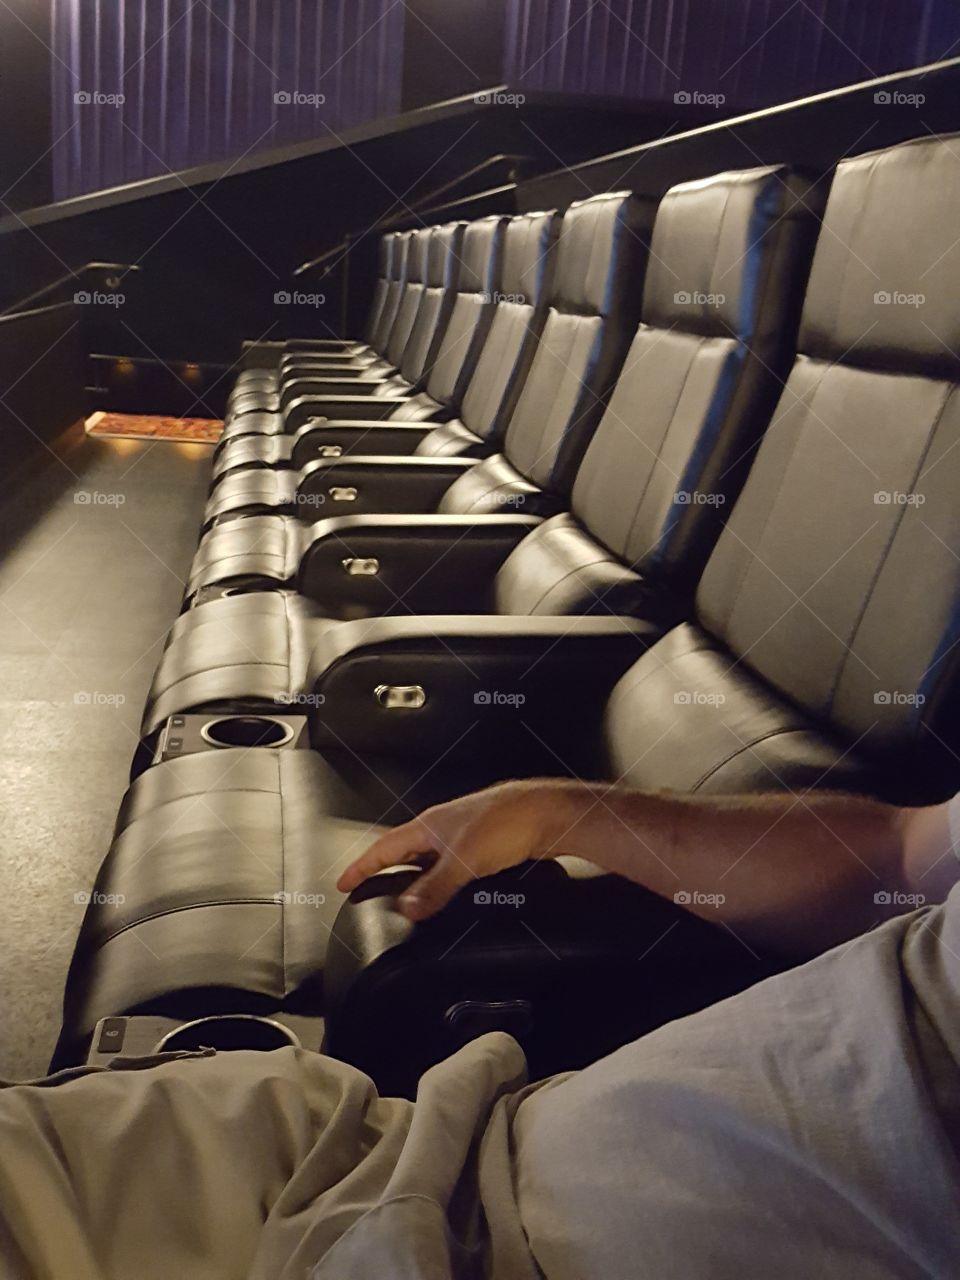 Ah yes, sit back recline and watch a new film!